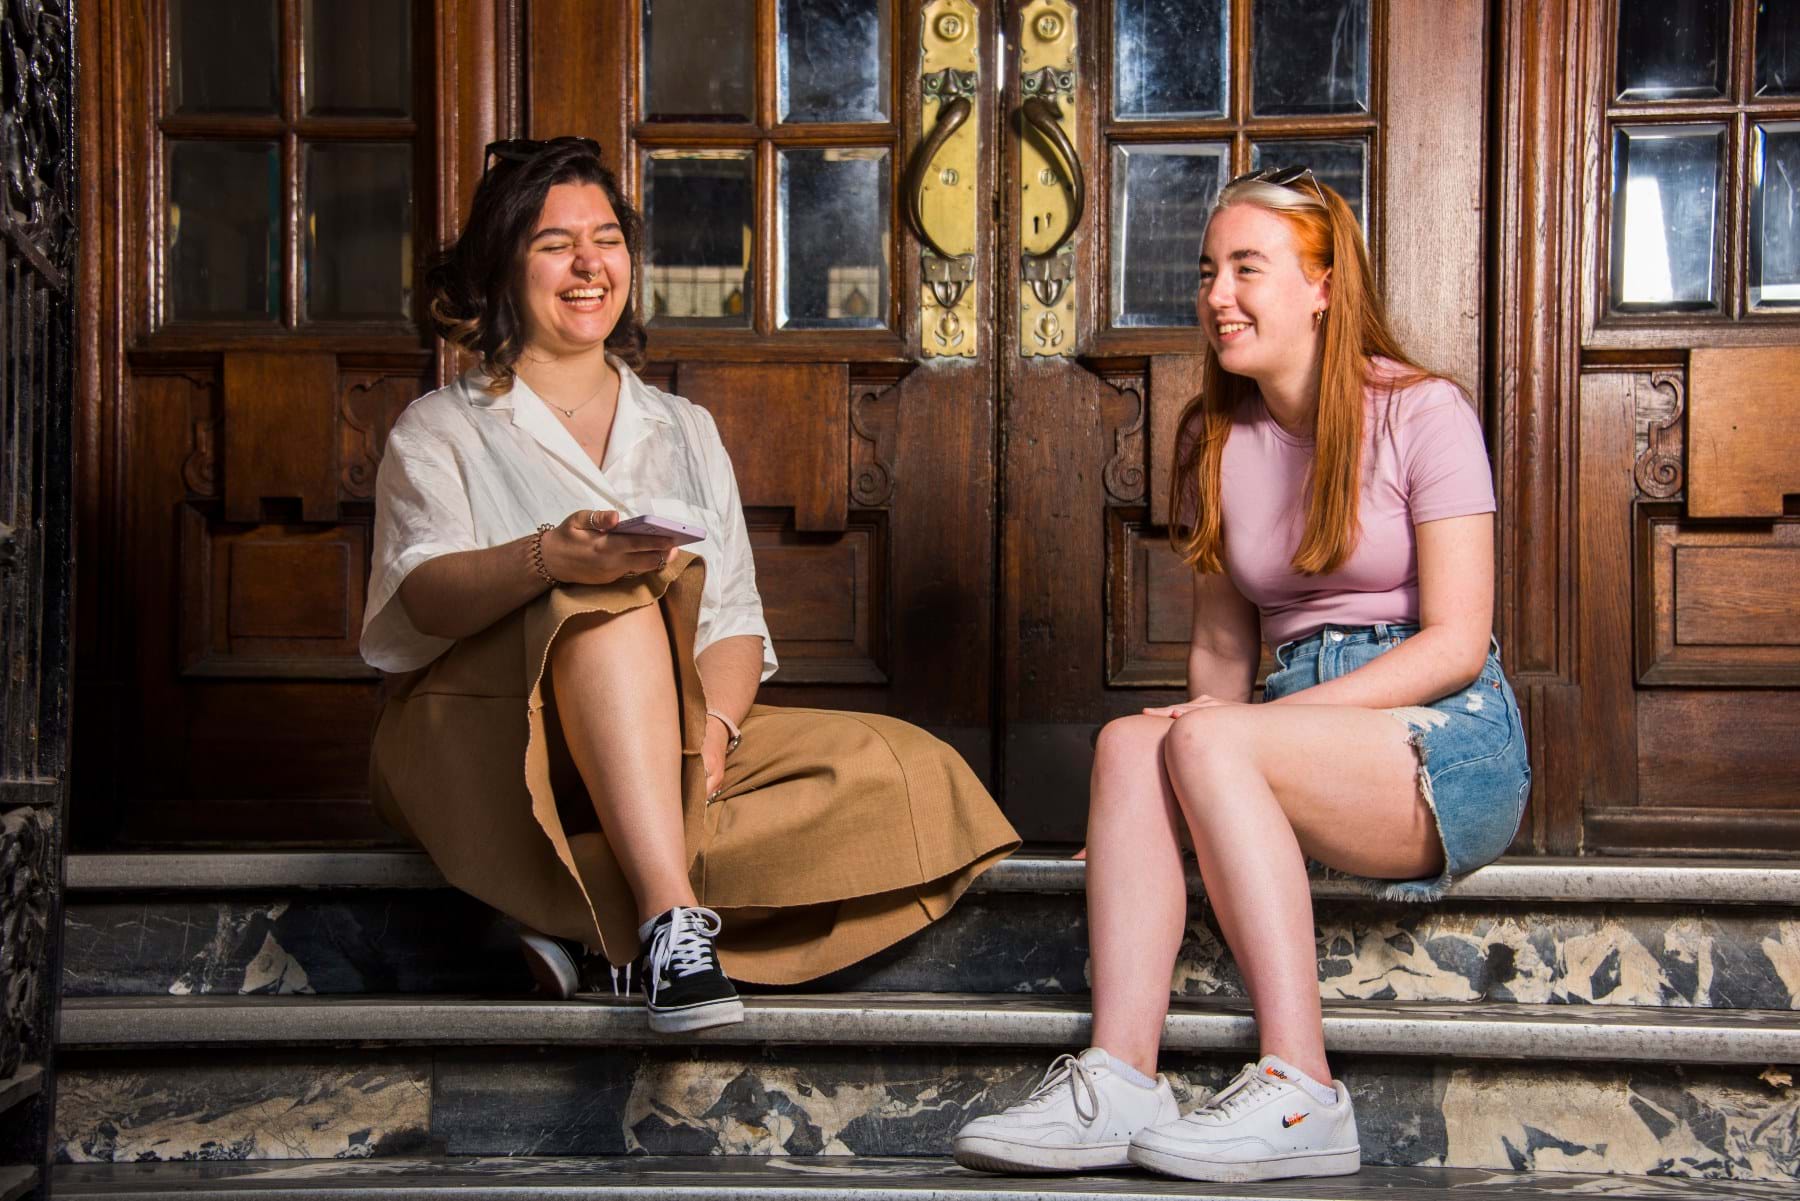 The image shows two students in summer clothes sitting on some marble steps in front of some wooden doors.